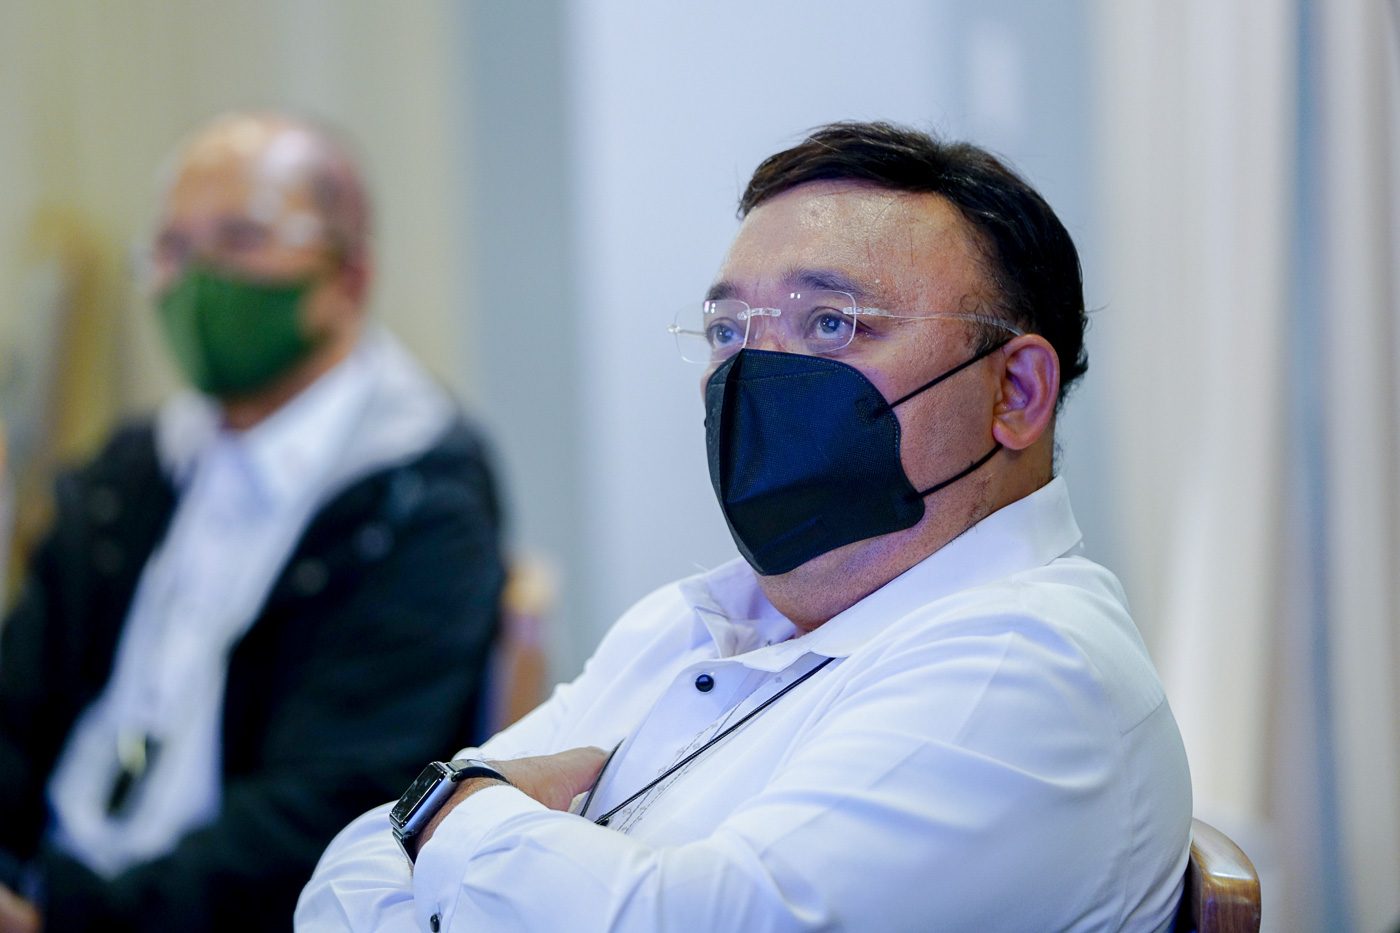 Harry Roque hospitalized due to COVID-19